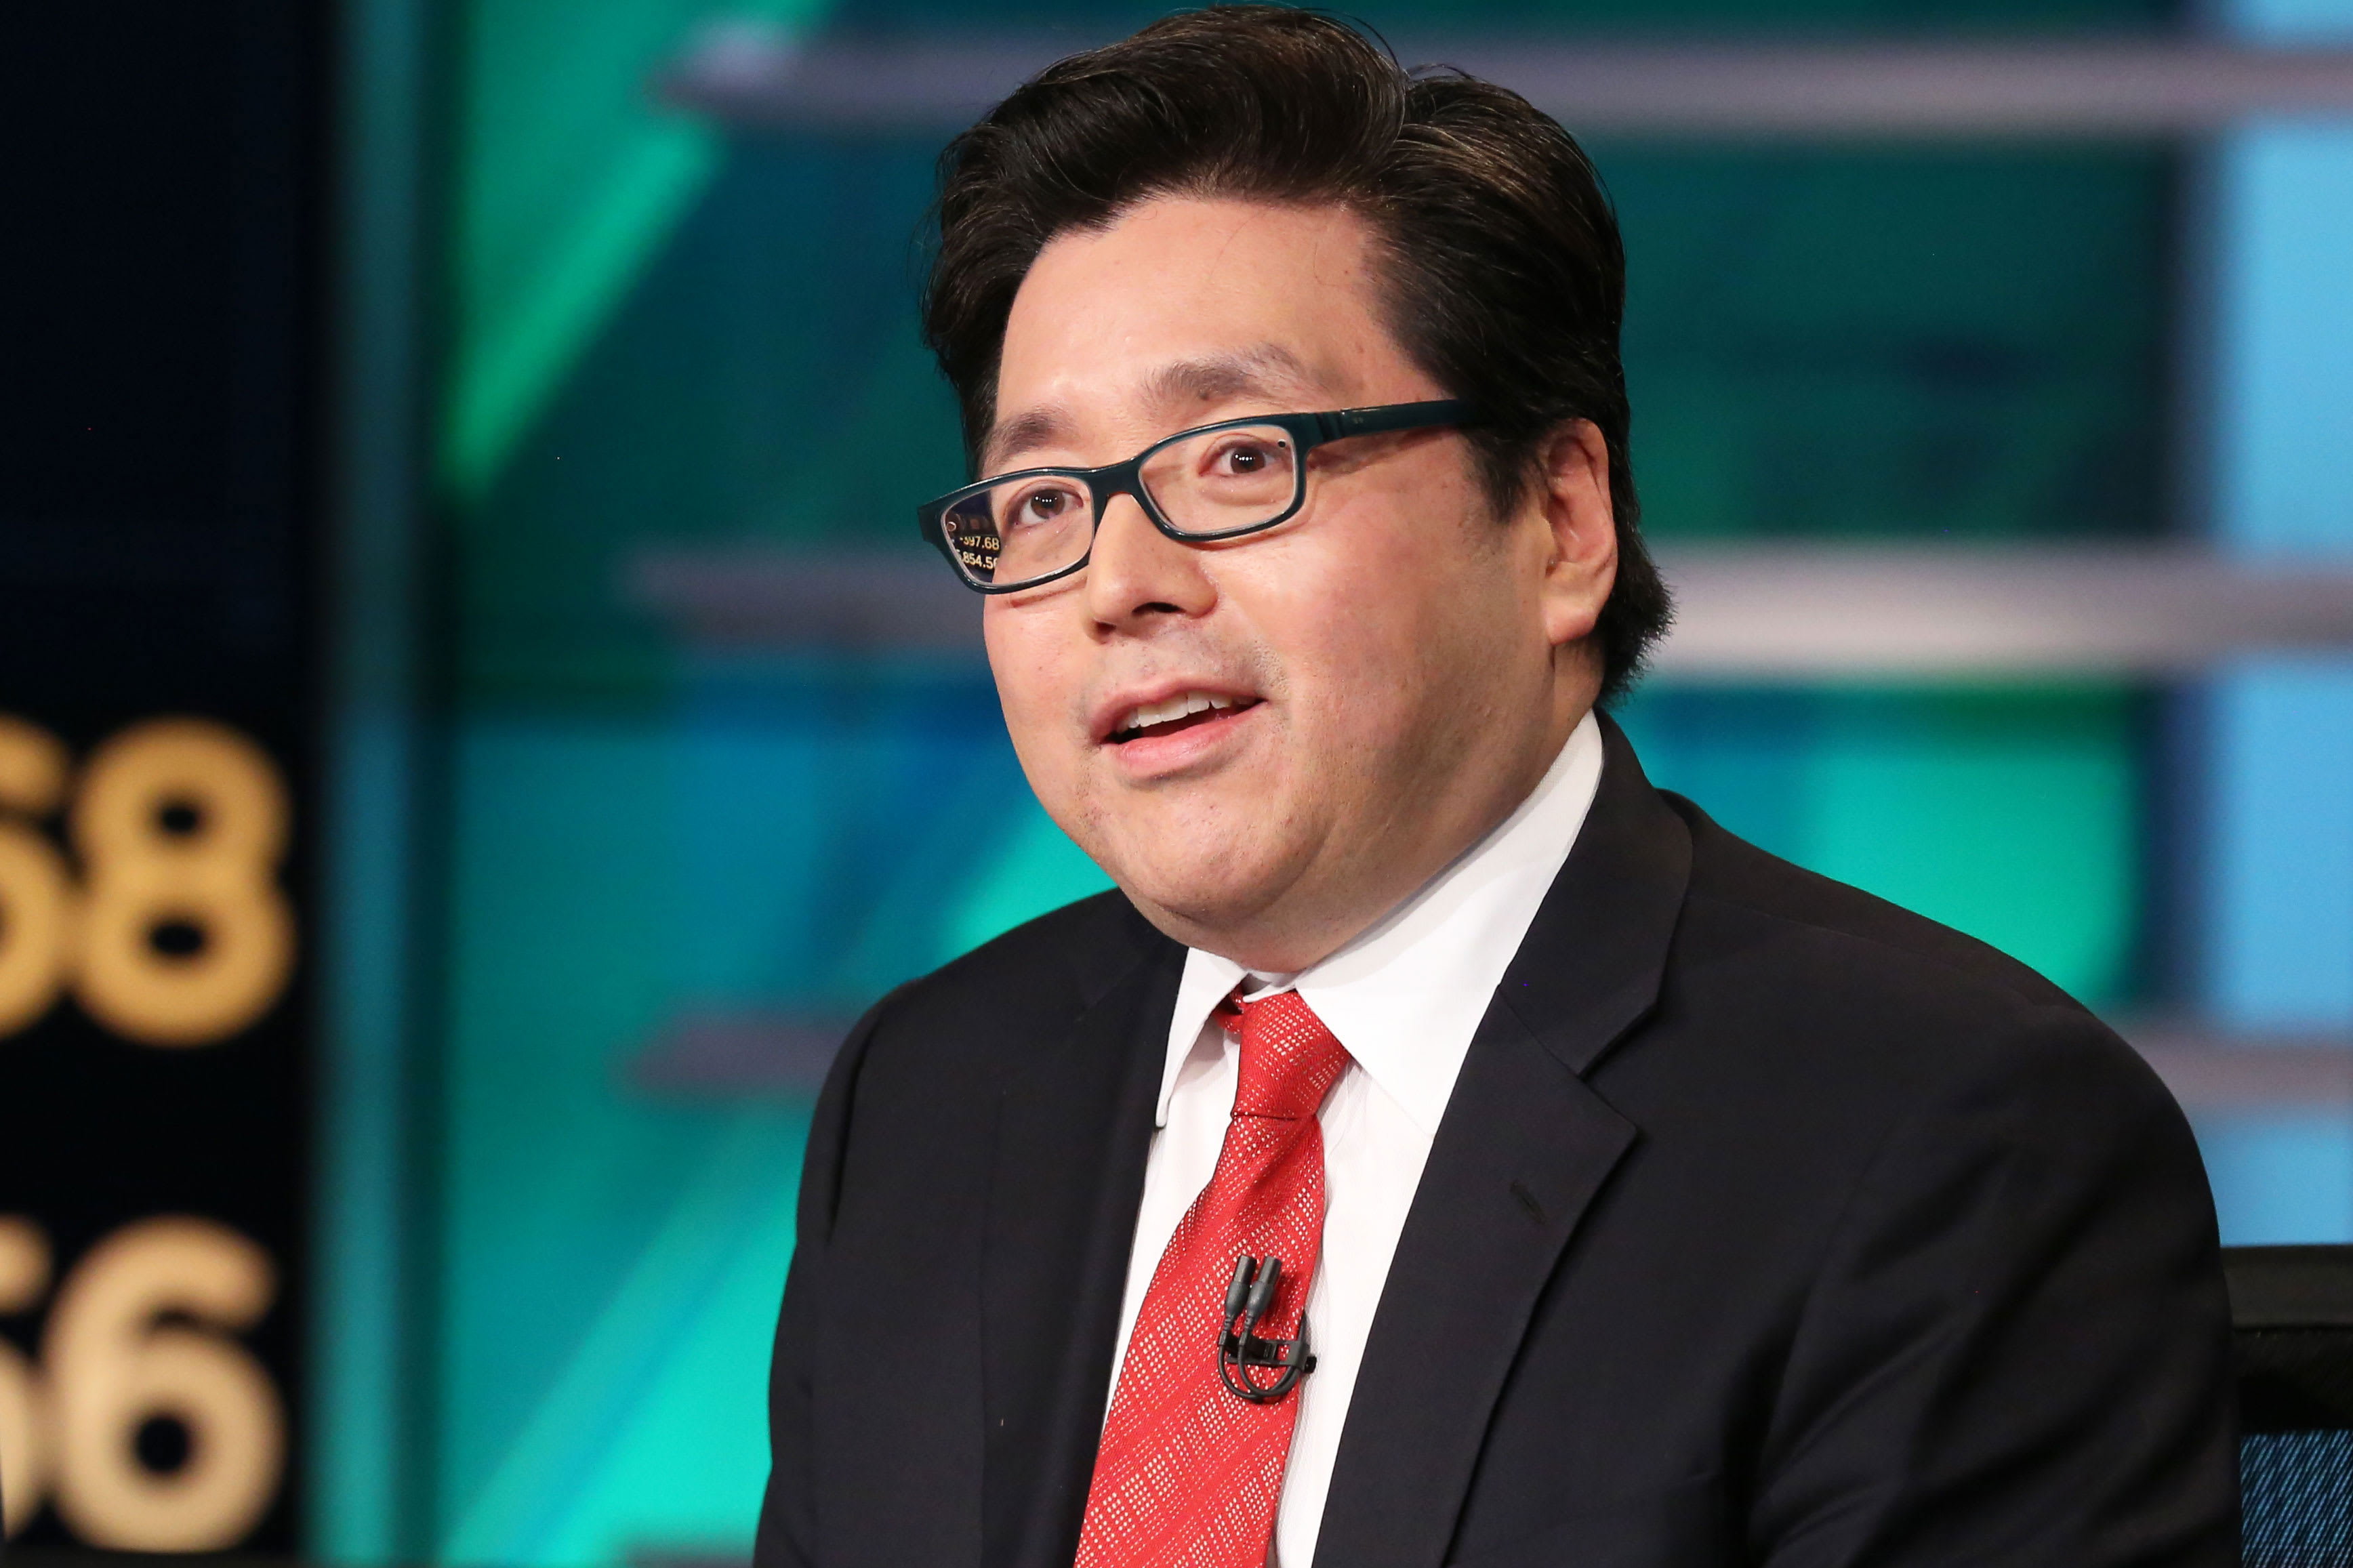 Sell-off in marijuana stocks reminds Tom Lee of bitcoin and the dotcom bubble